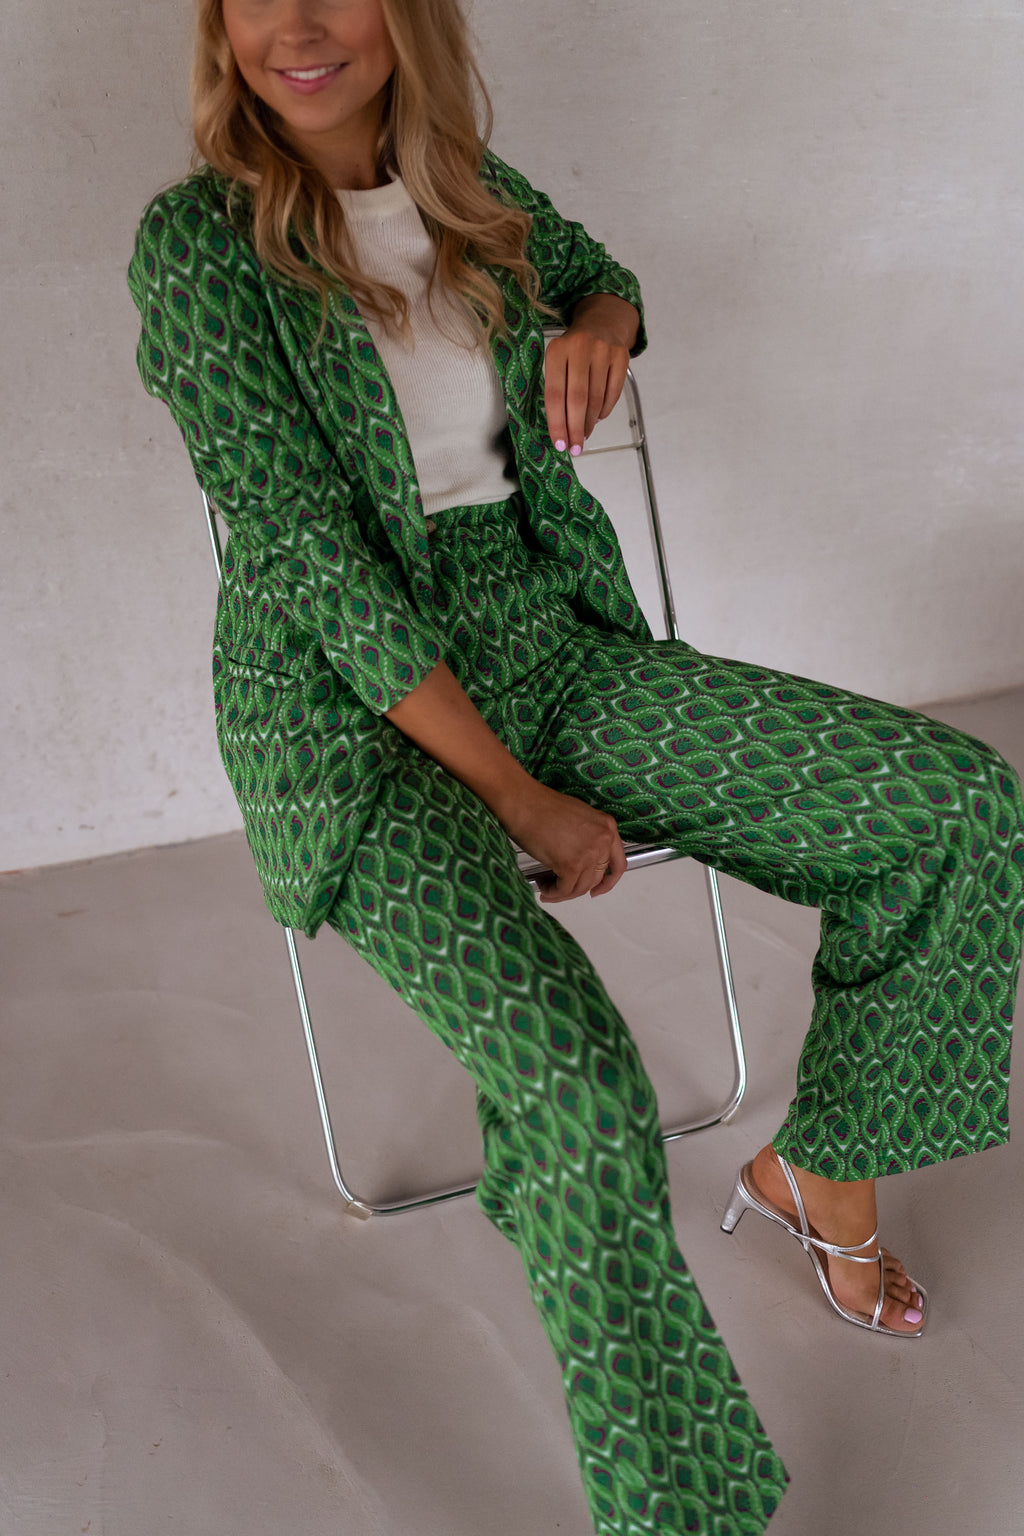 Pants Peter - green patterned